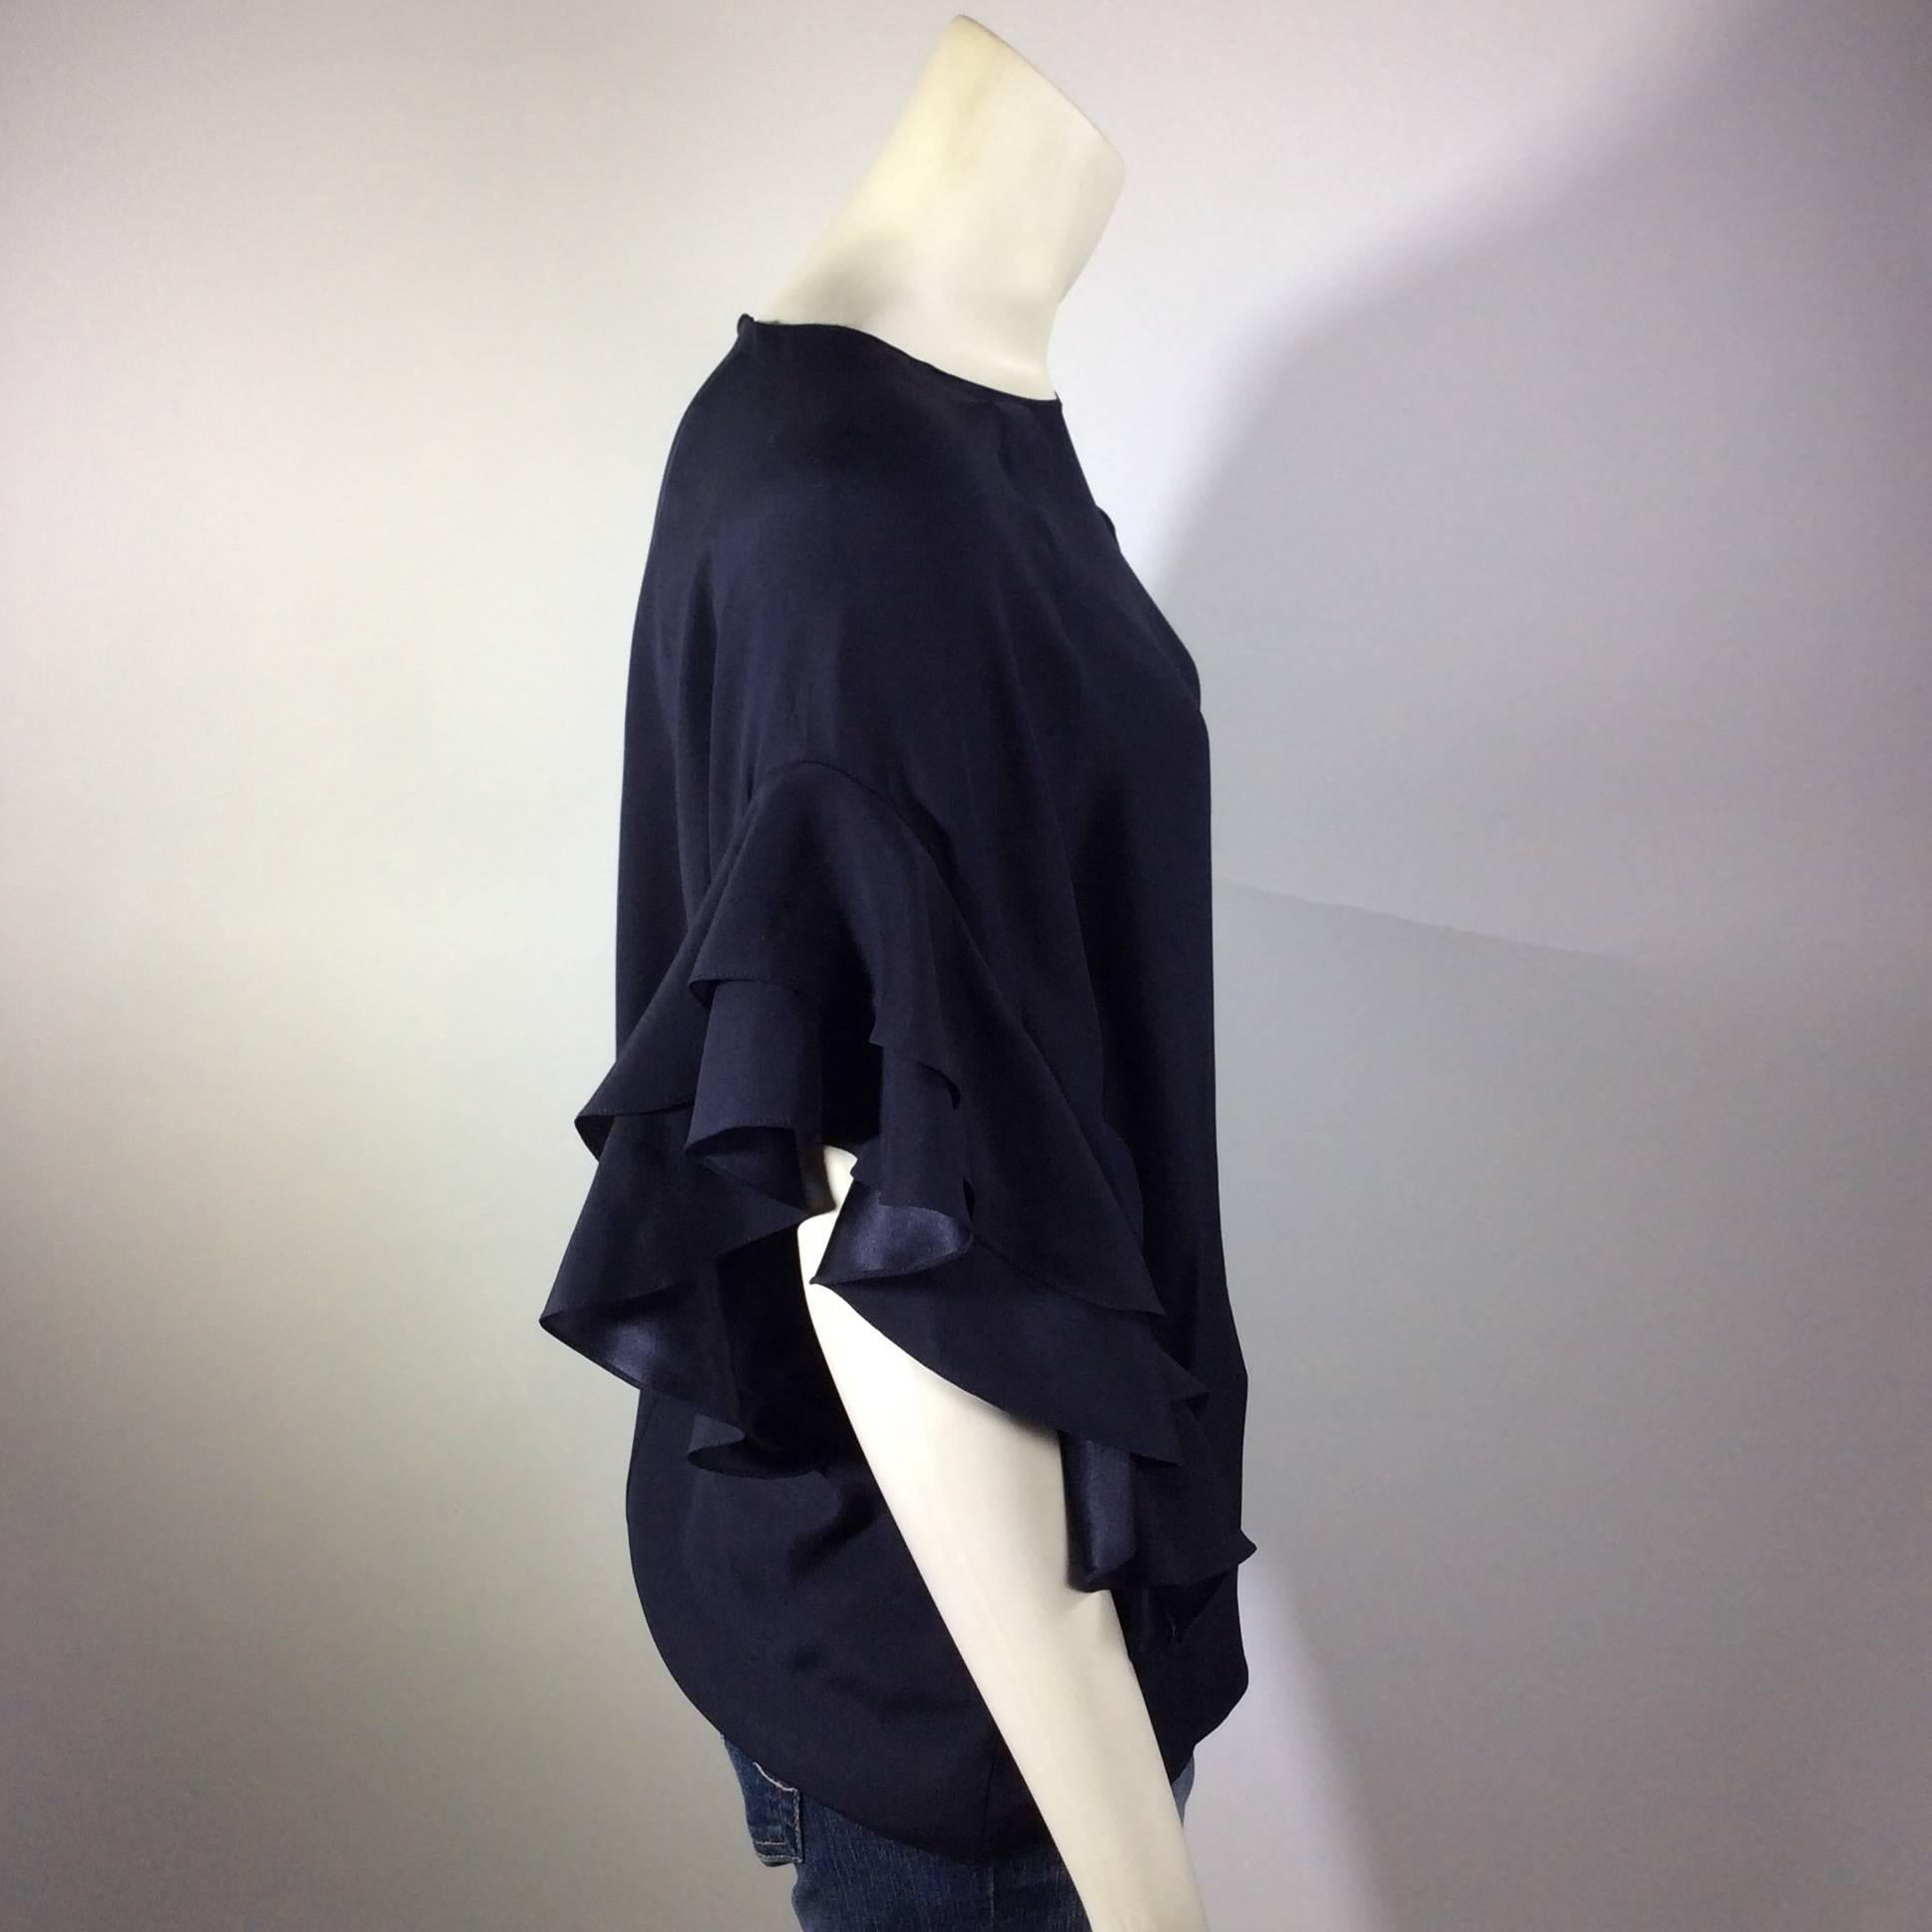 Chloe Navy Ruffled Sleeve Blouse In New Condition For Sale In Narberth, PA